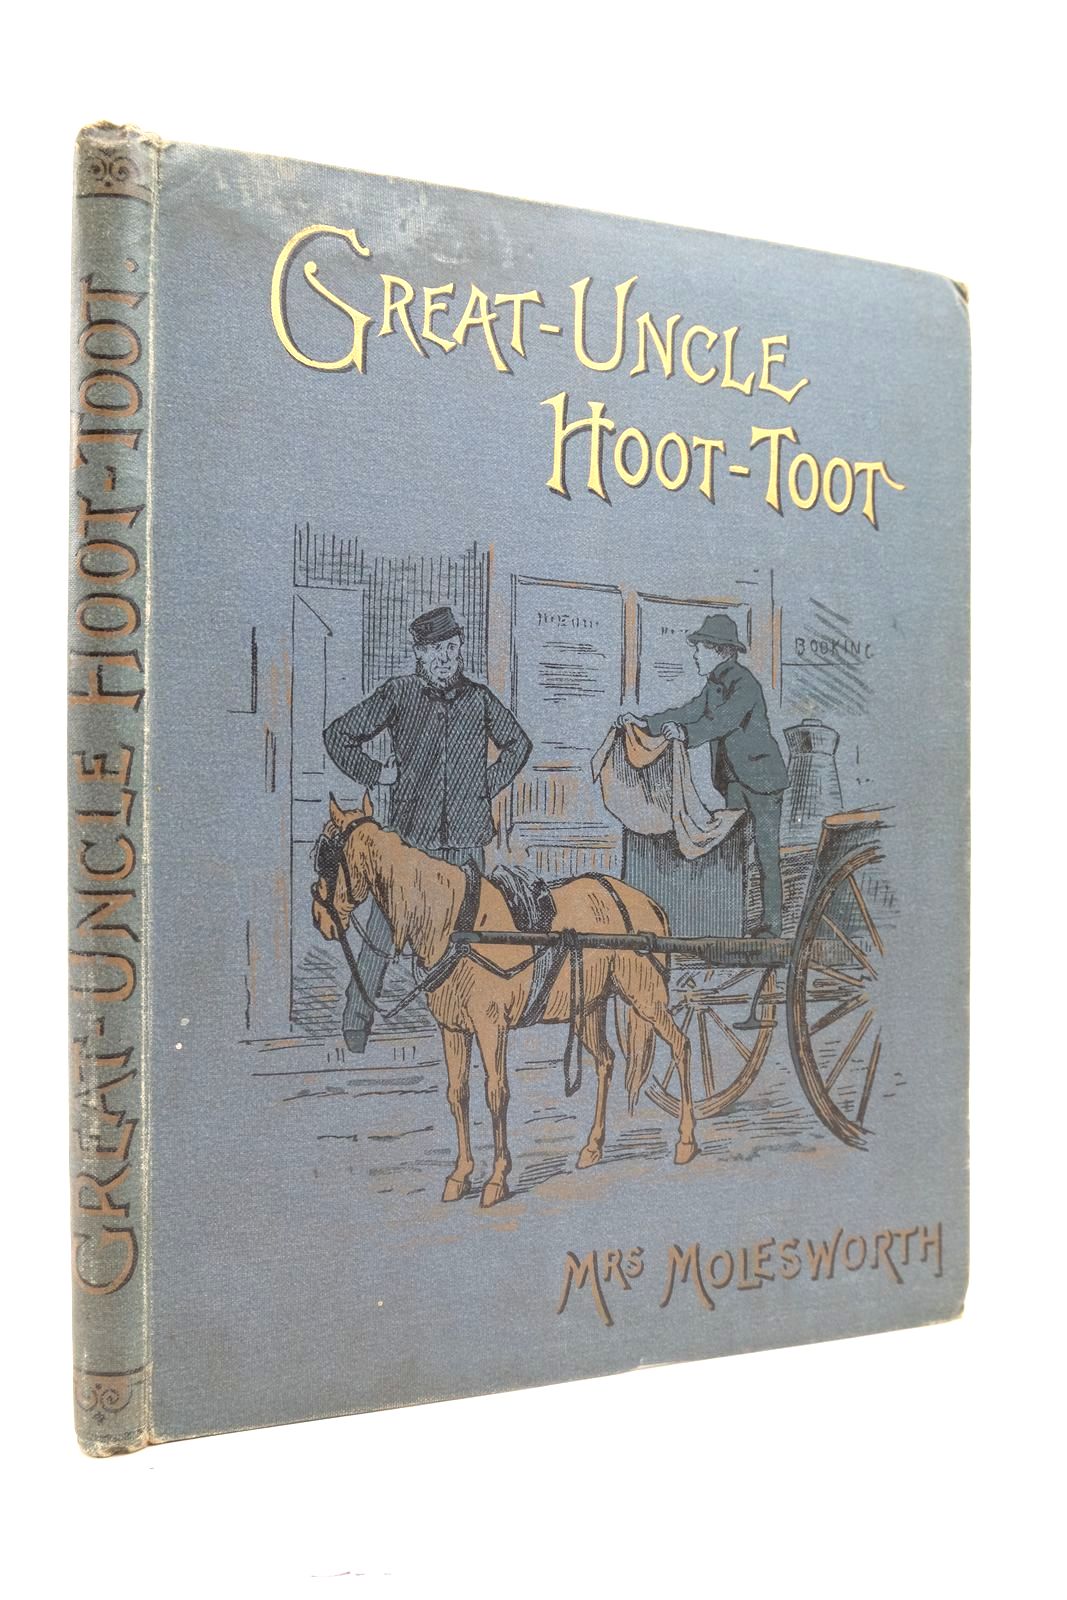 Photo of GREAT-UNCLE HOOT-TOOT written by Molesworth, Mrs. illustrated by Browne, Gordon Walker, E.J. Lawson, Lizzie et al., published by Society for Promoting Christian Knowledge (STOCK CODE: 2140038)  for sale by Stella & Rose's Books